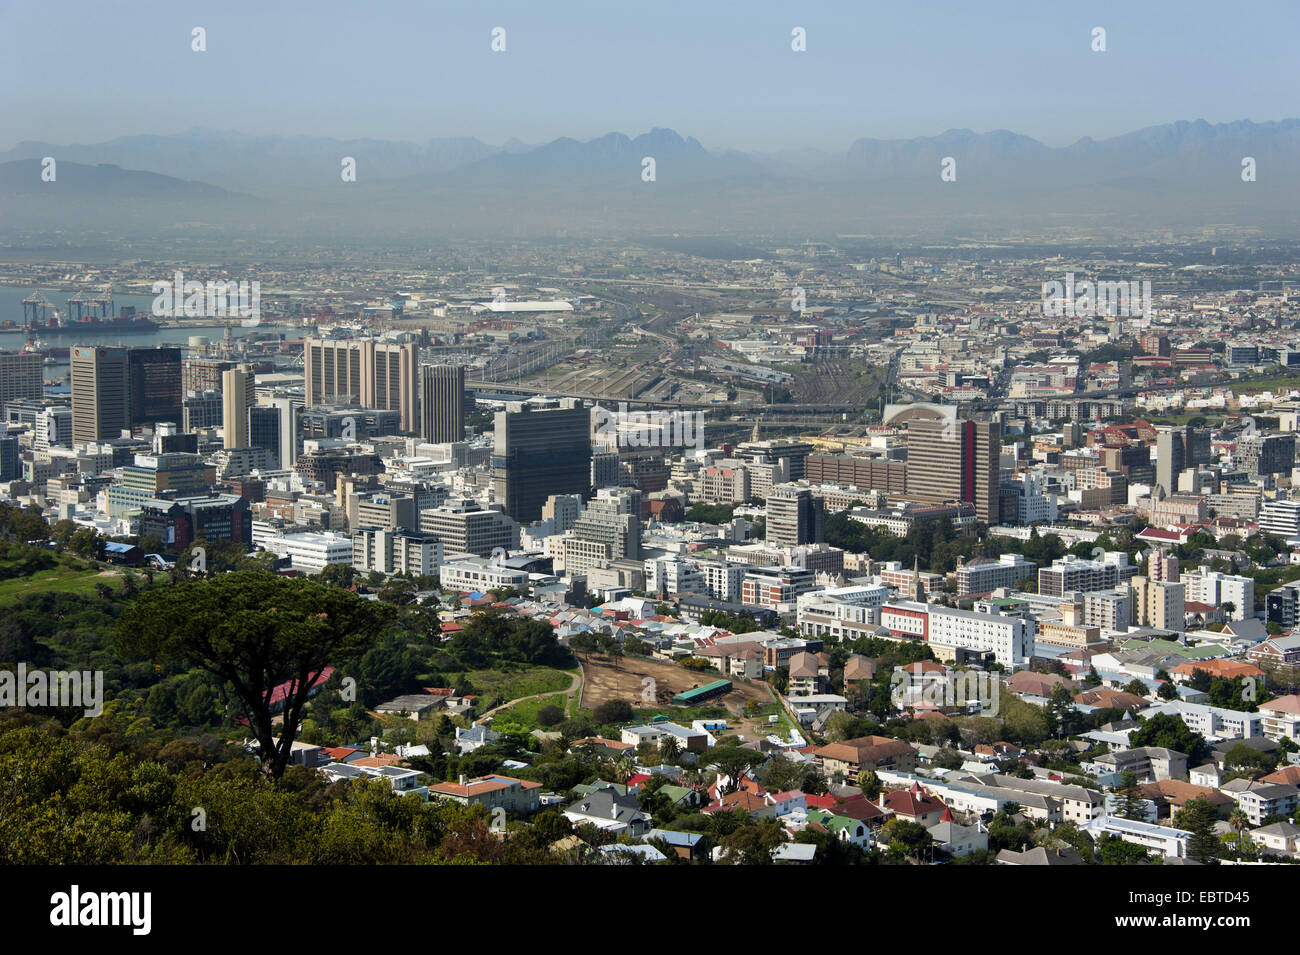 view over the sea of houses of the metropolis, South Africa, Western Cape, Capetown Stock Photo